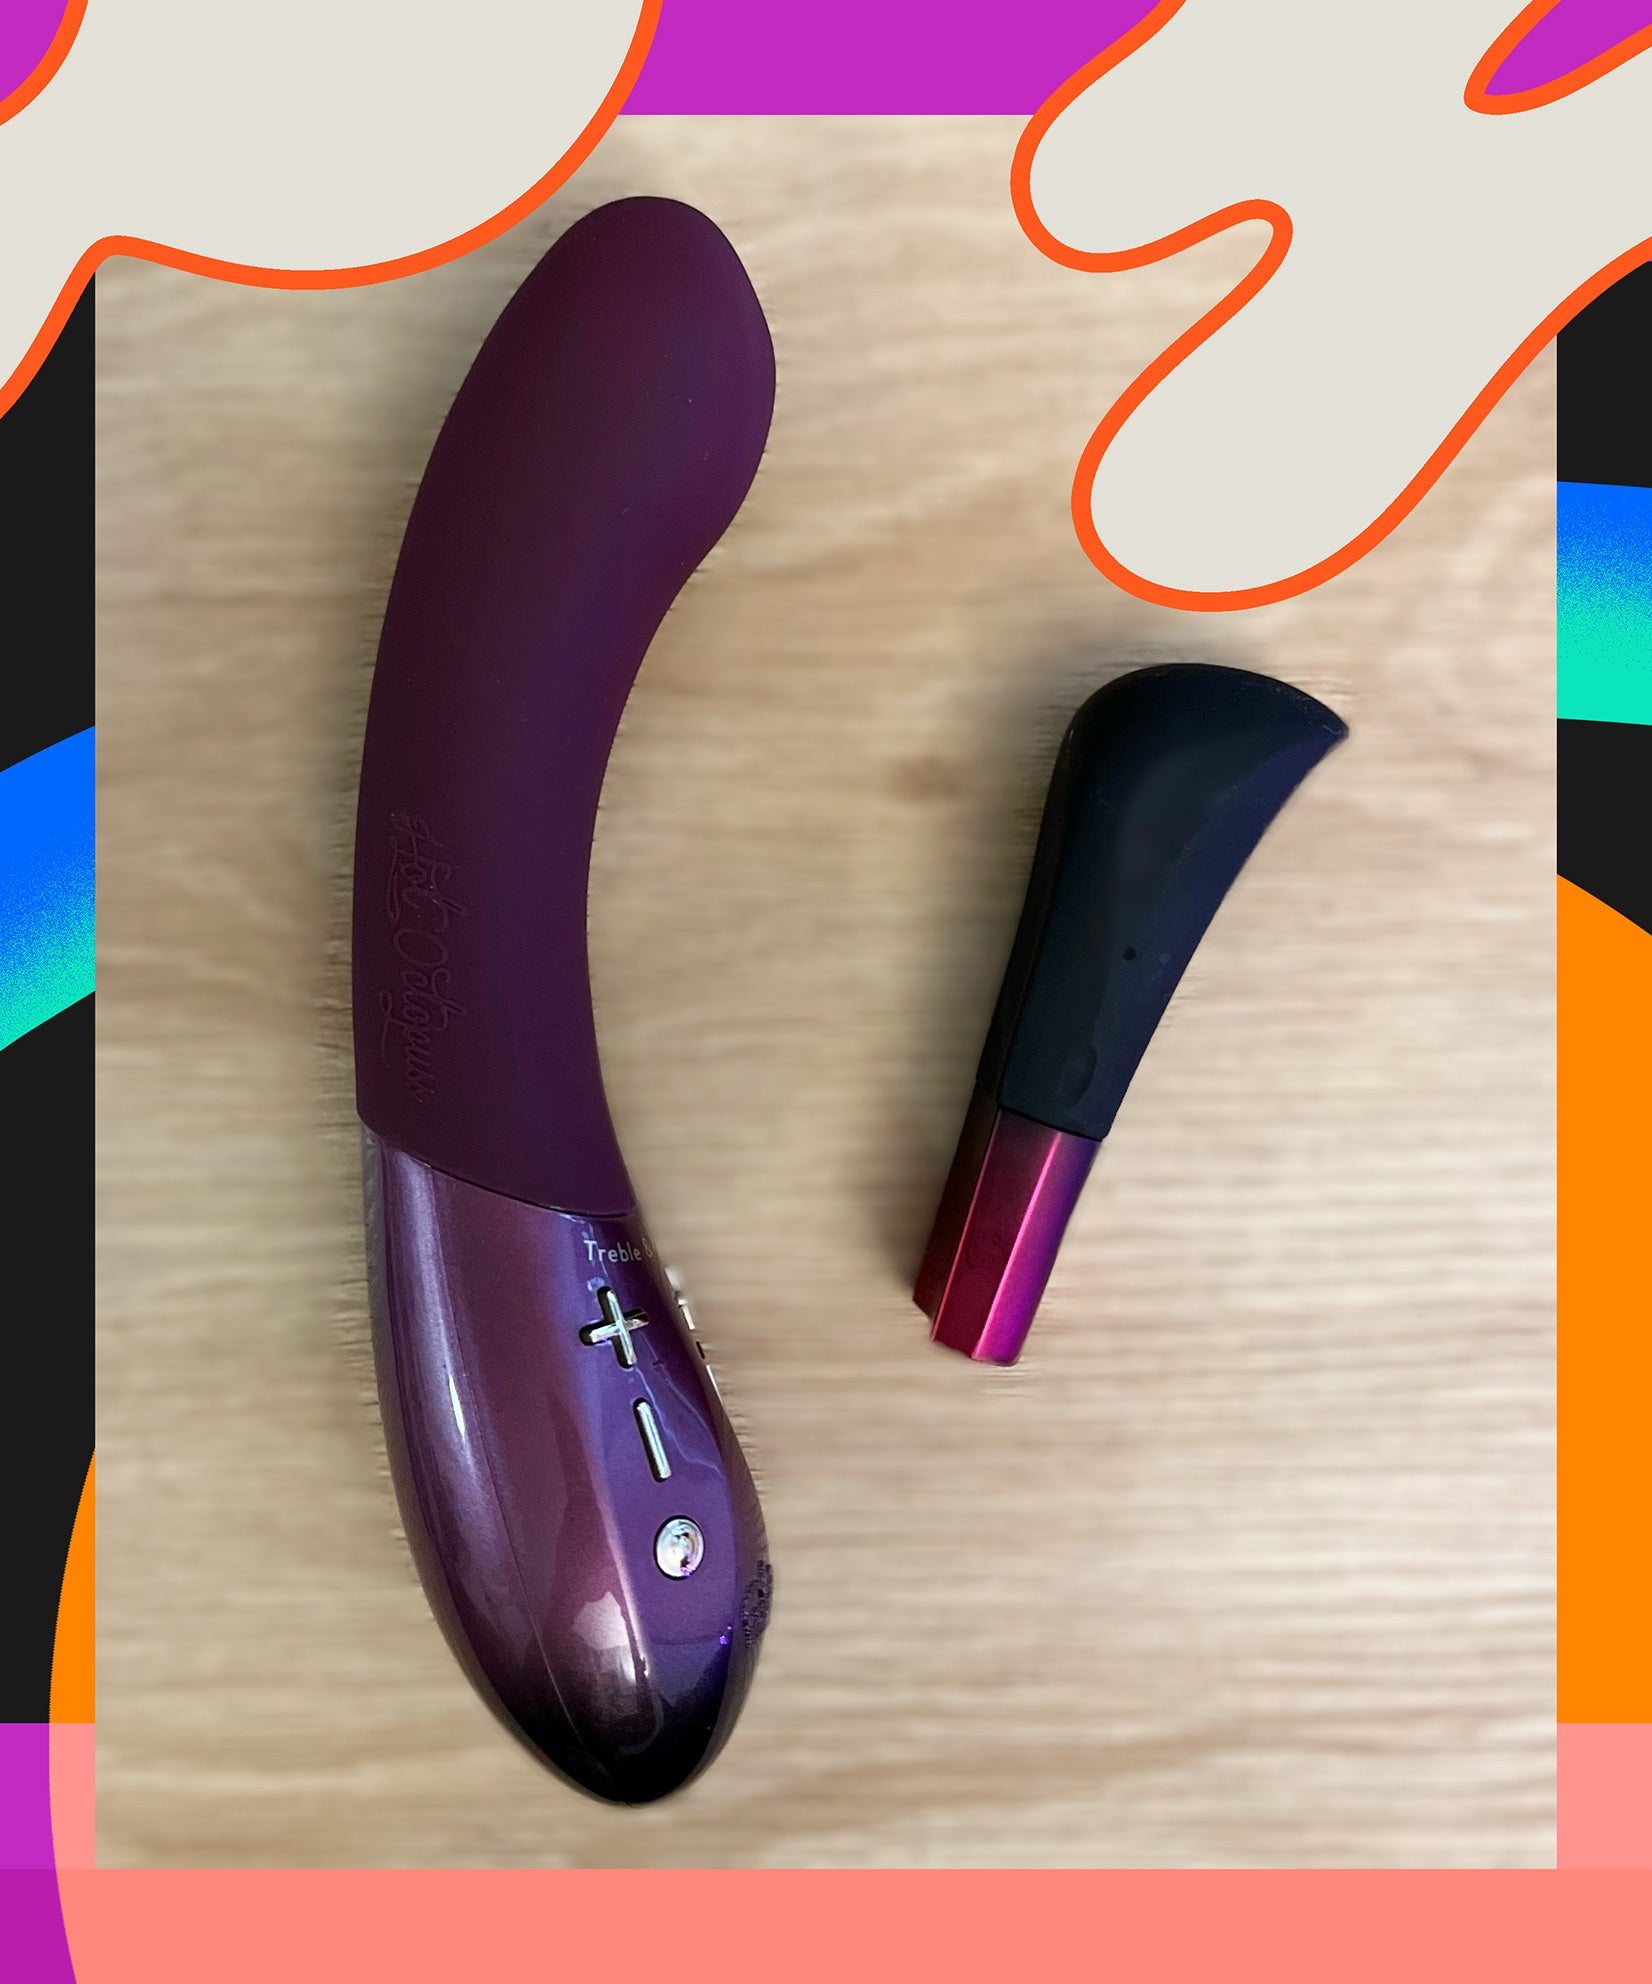 National Orgasm Day Hot Octopuss Vibrator Review image